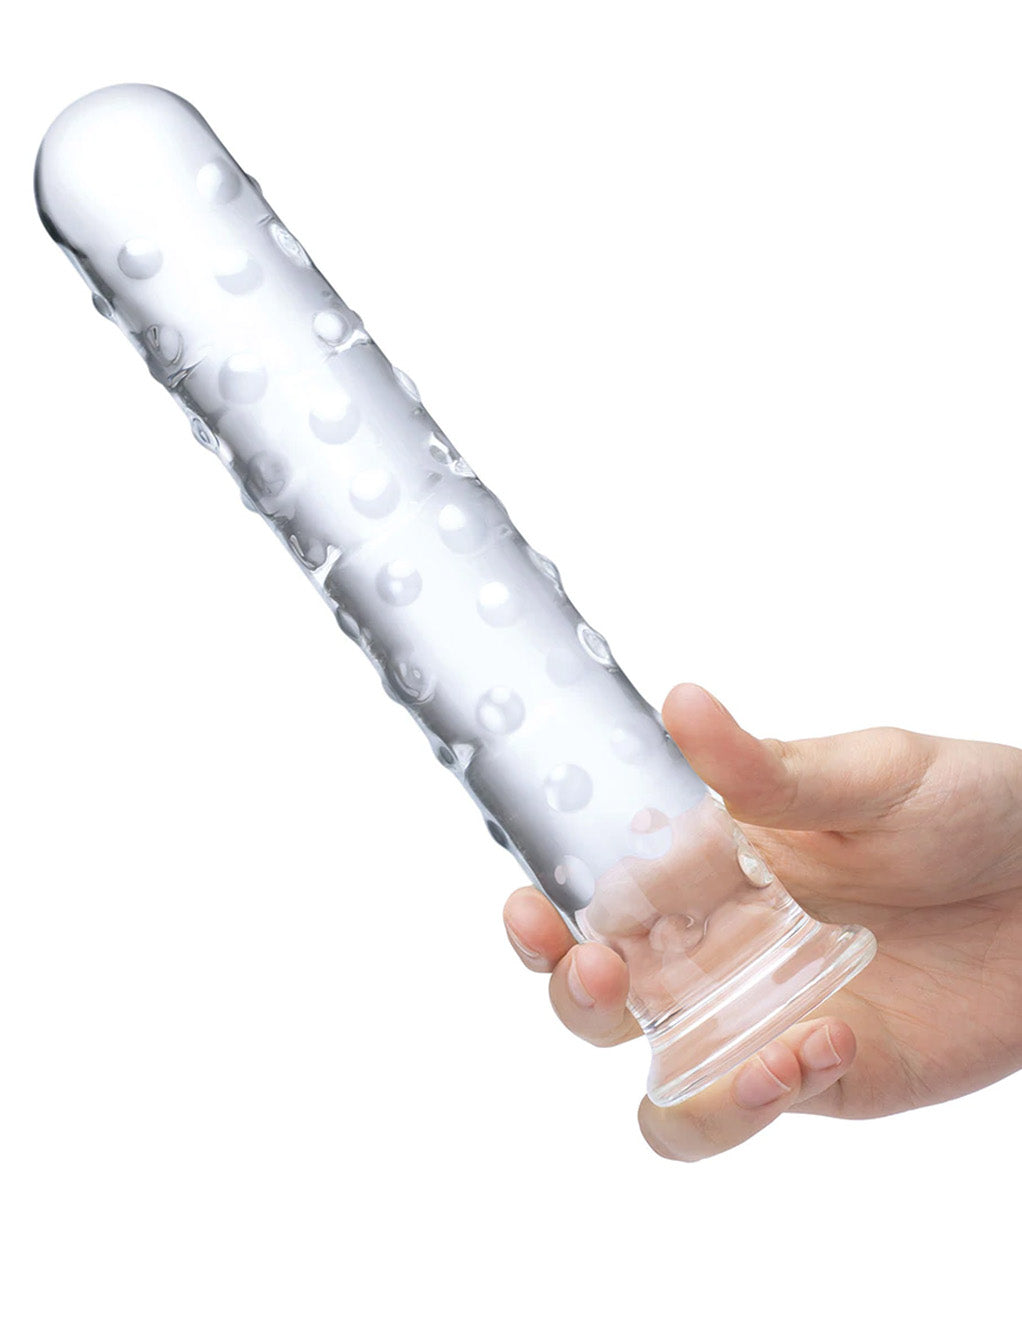 ahmed el tobgy recommends 12 Inch Glass Dildo